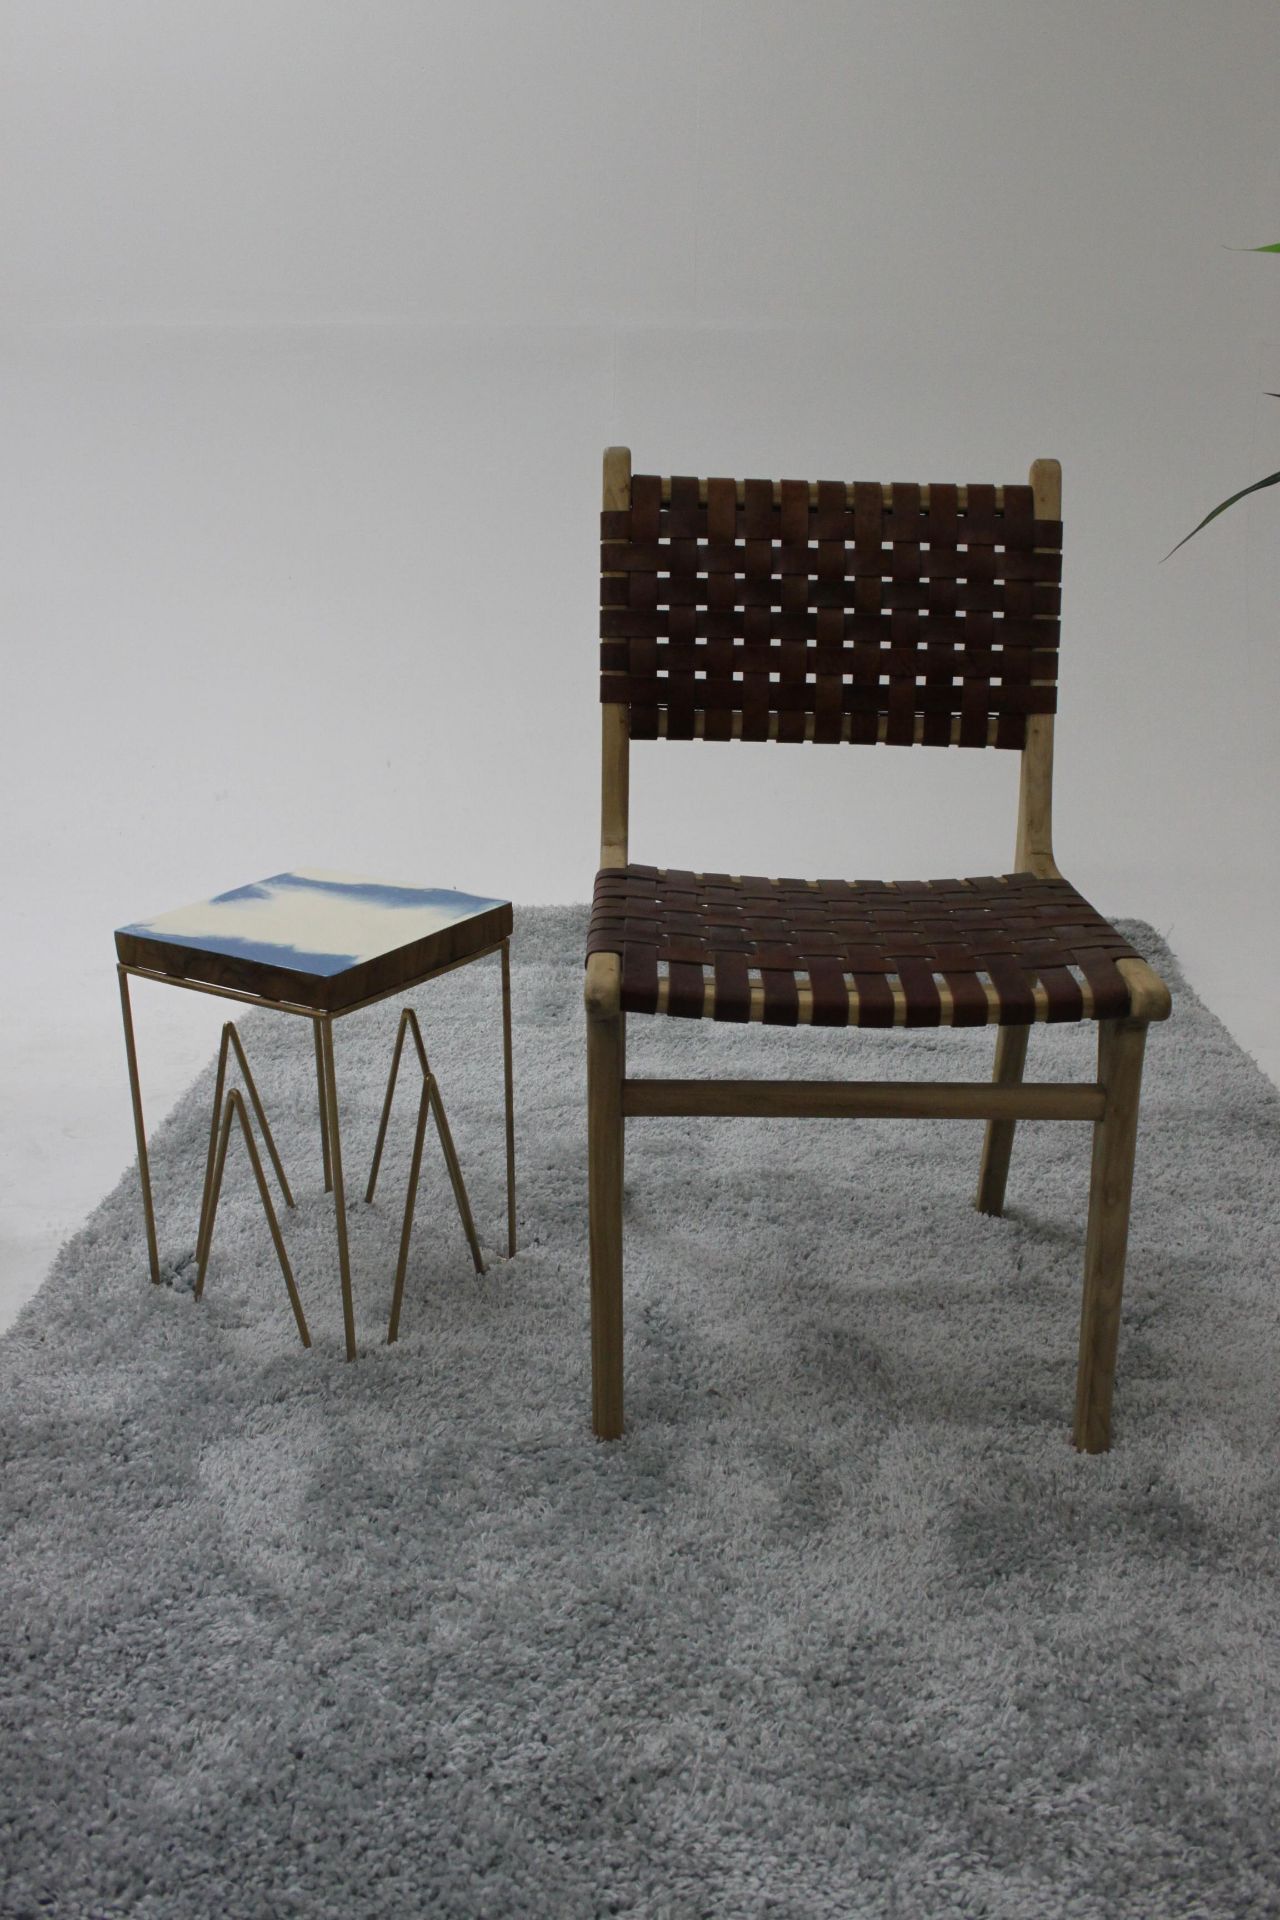 Tan Woven Leather Dining Chair 50 Solid Acacia Wood Paired With Flat Woven Straps In Tan Creates - Image 2 of 3